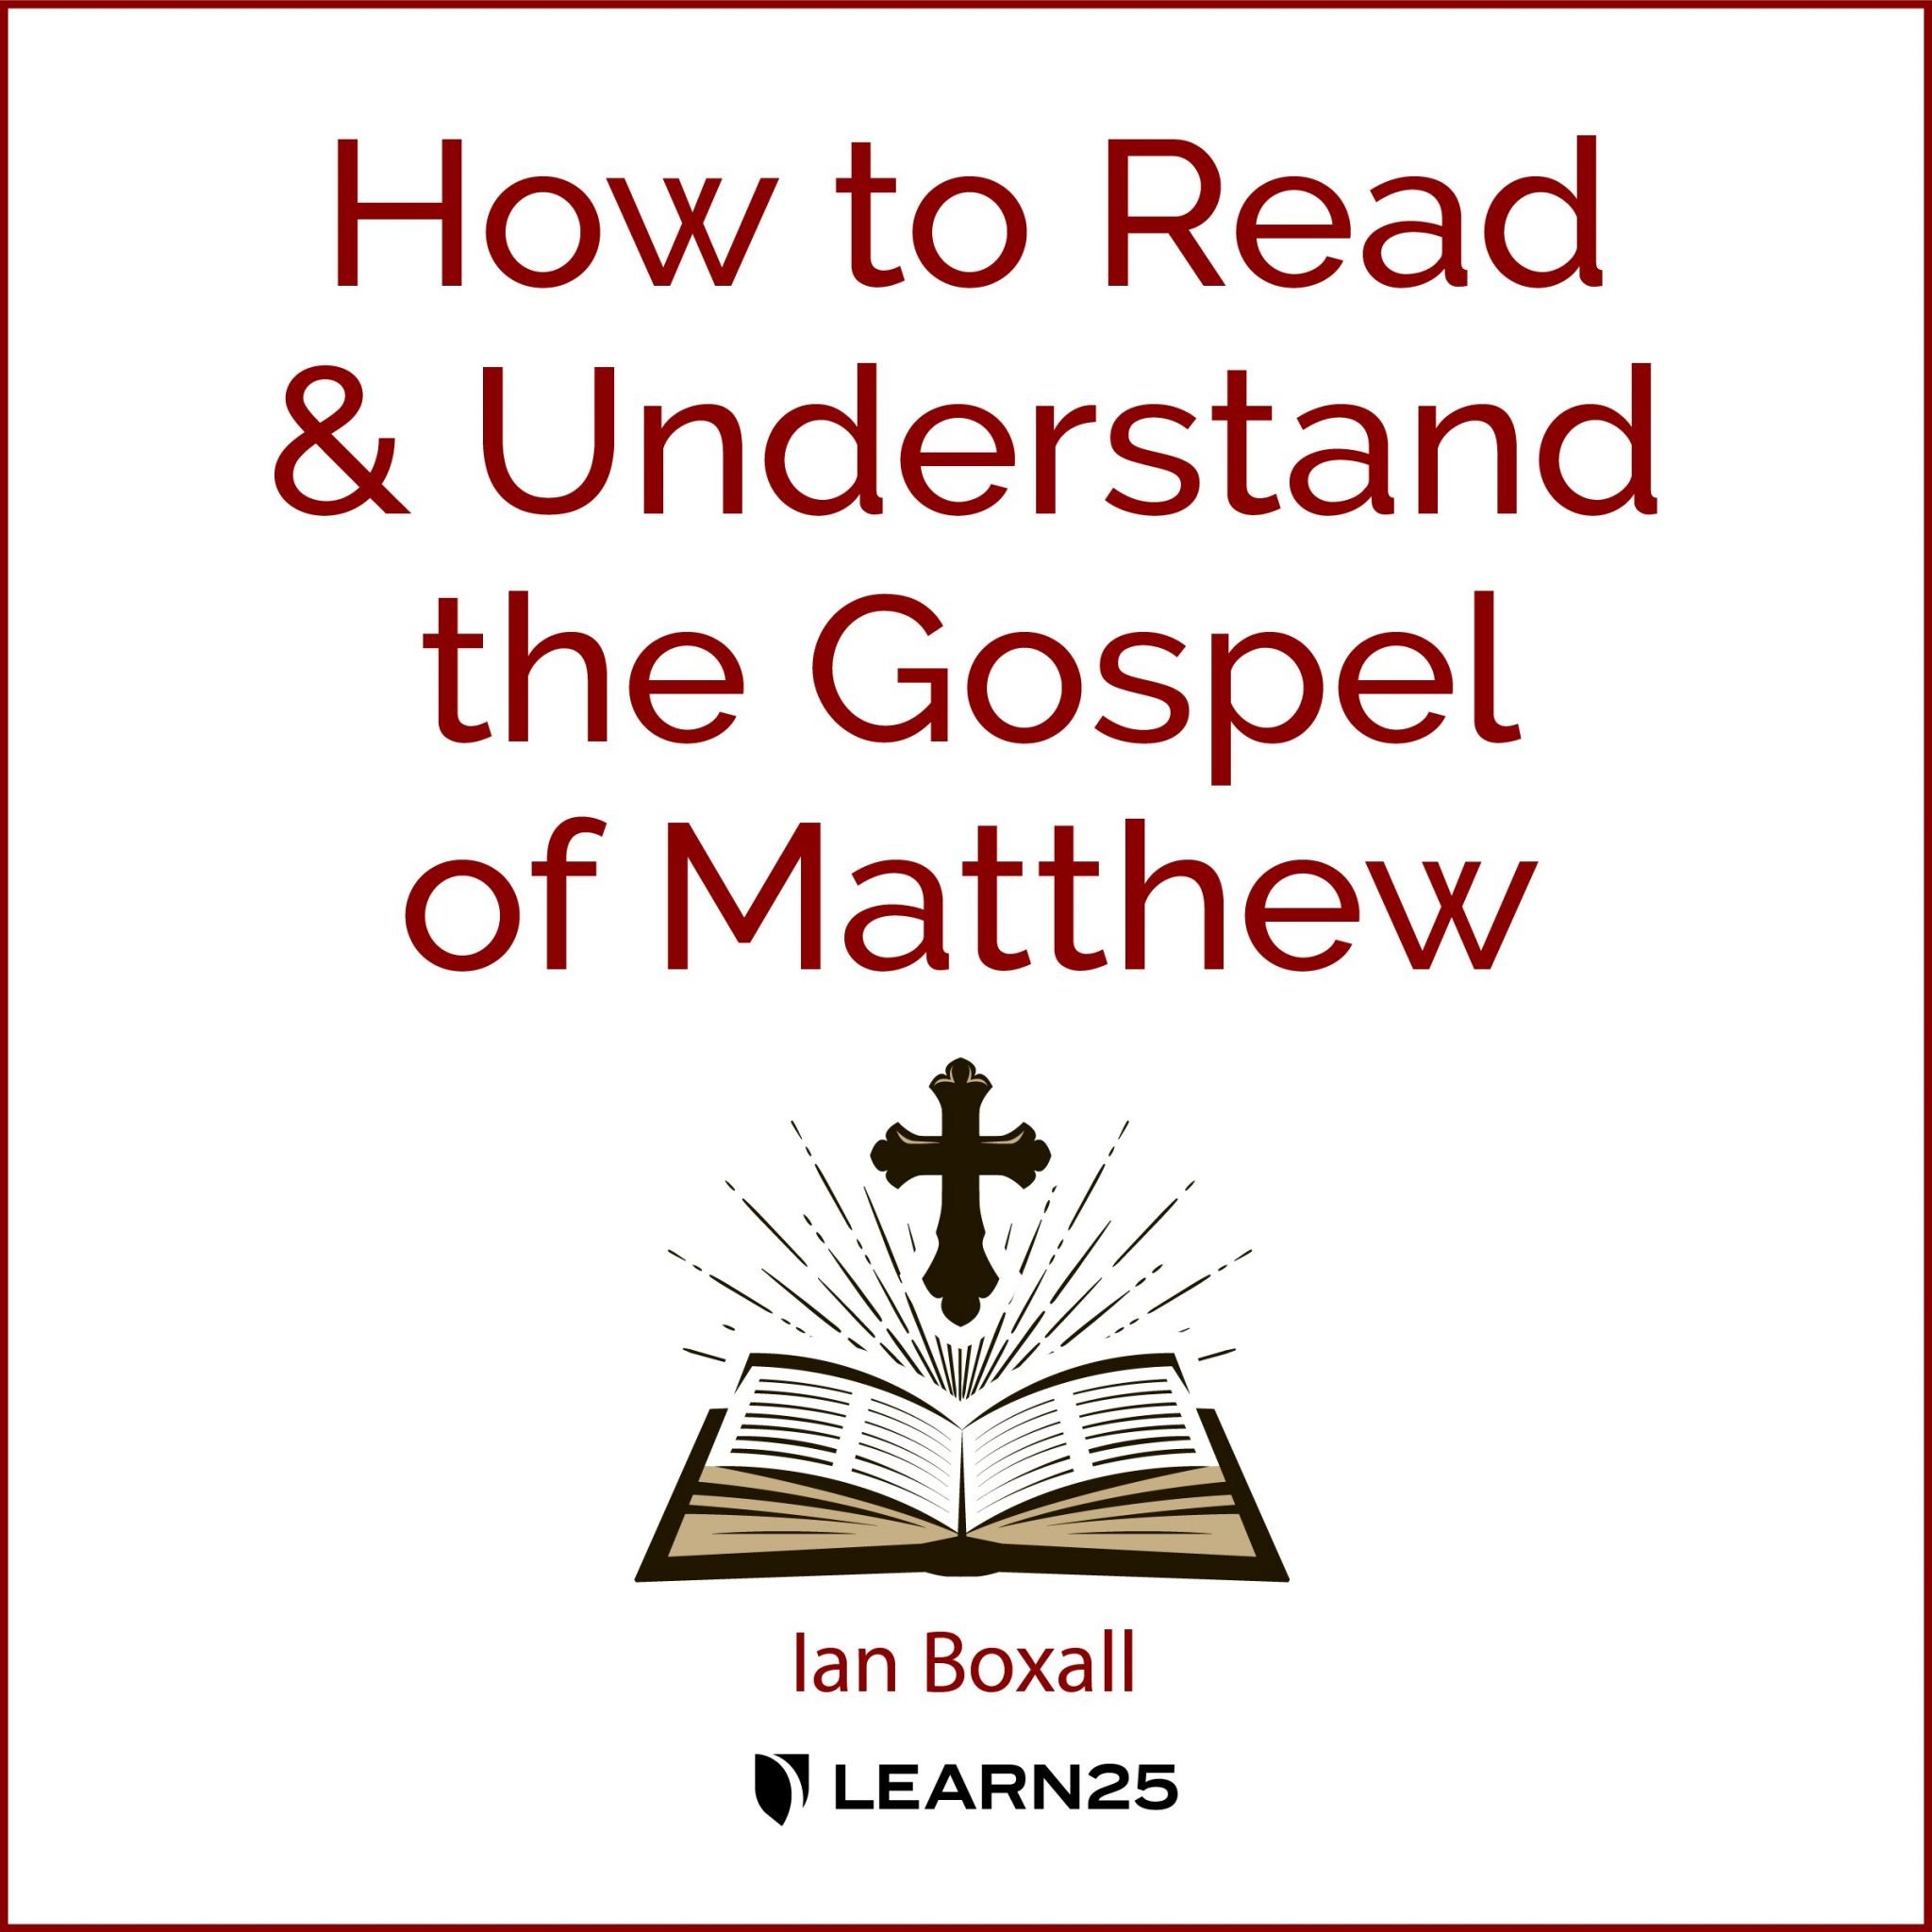 how-to-read-and-understand-the-gospel-of-matthew-learn25